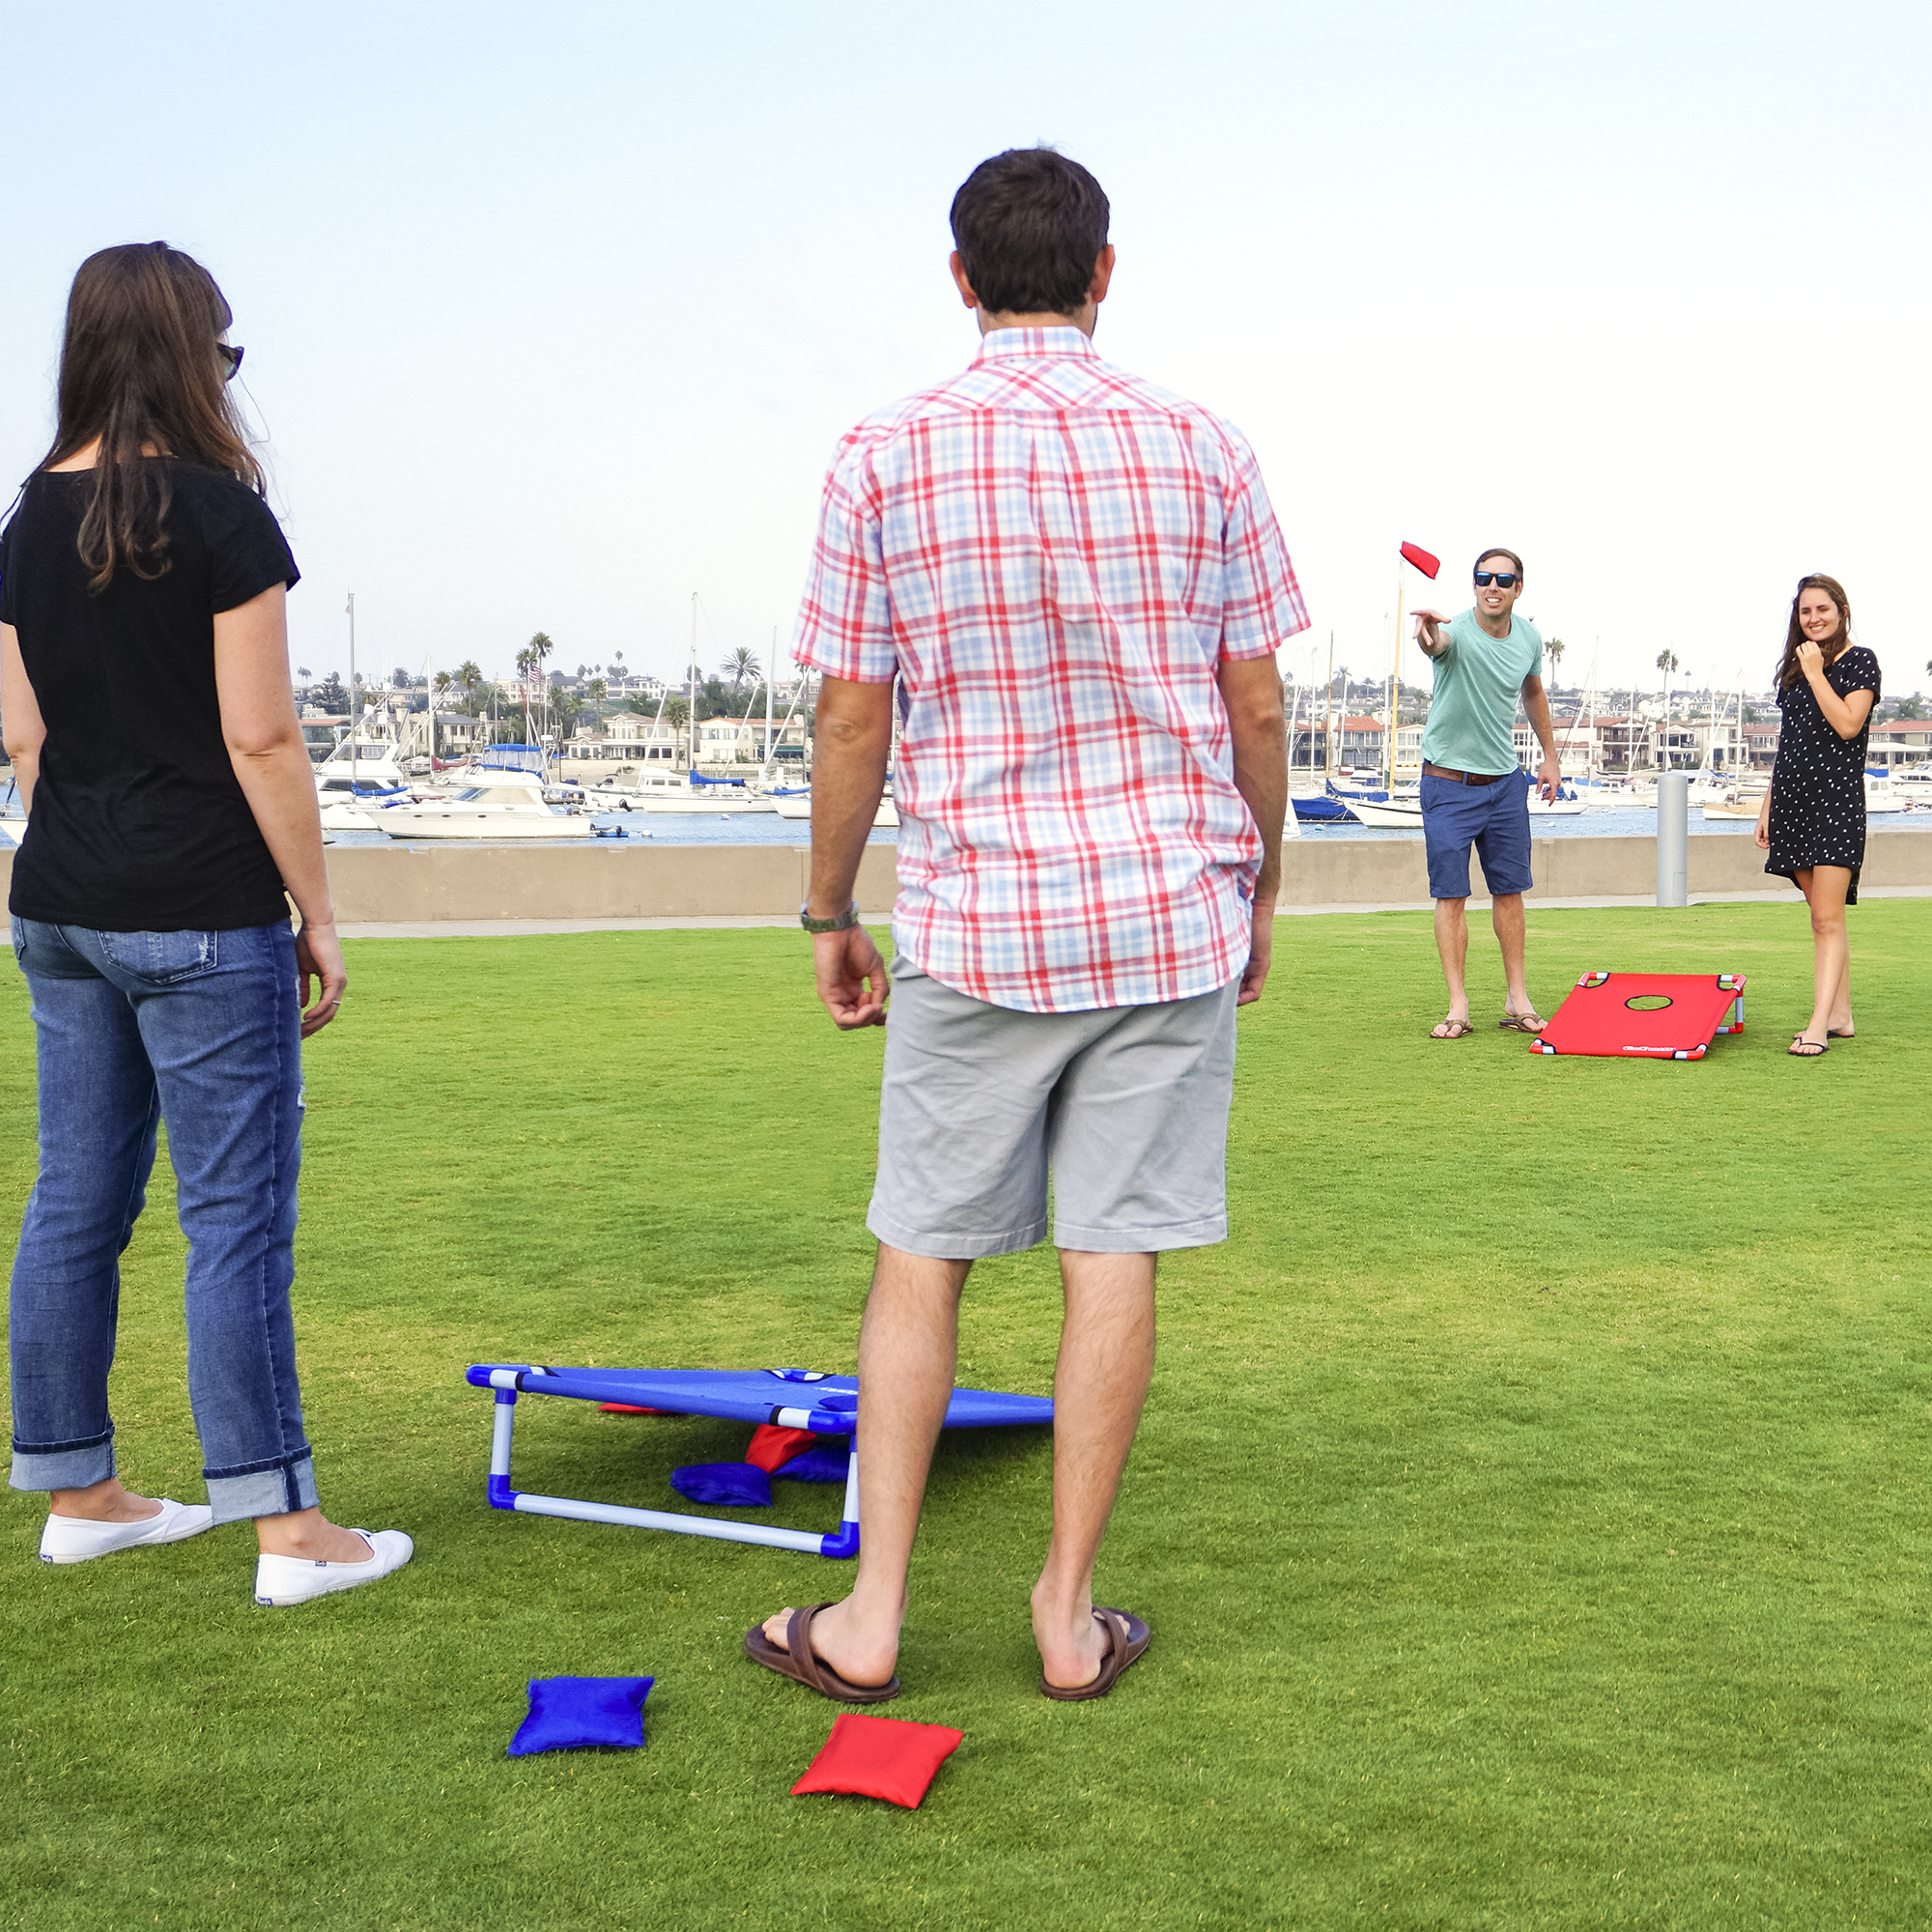 GoSports Foldable PVC Framed Cornhole Game Set with 8 Bean Bags and Portable Carrying Case - image 2 of 5